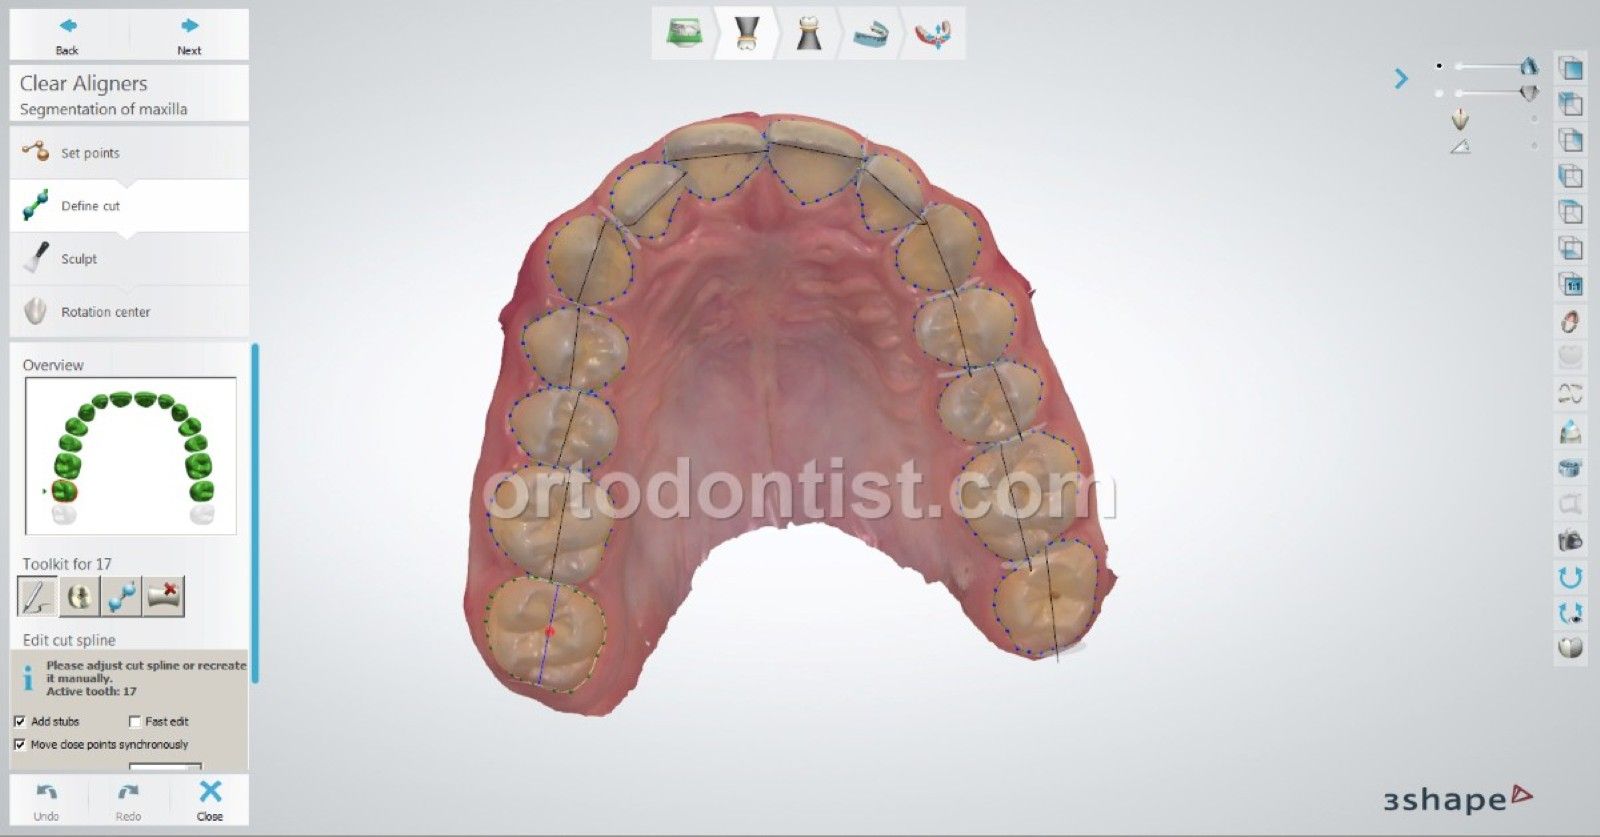 clear aligners young patient m.e 6